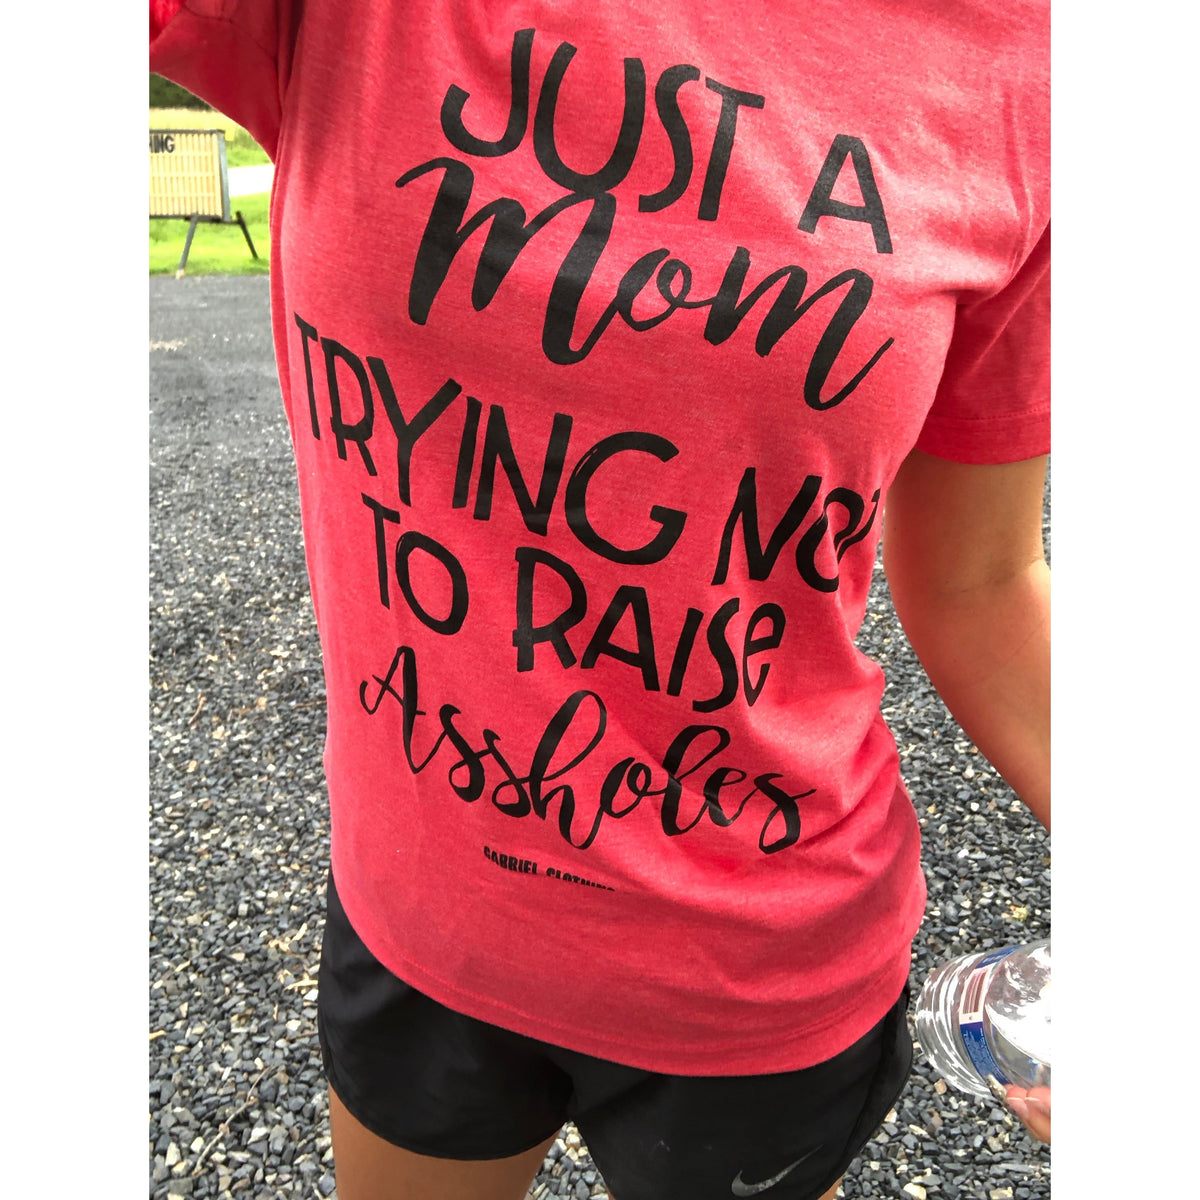 Just a mom trying not to raise assholes Tee or sweatshirt